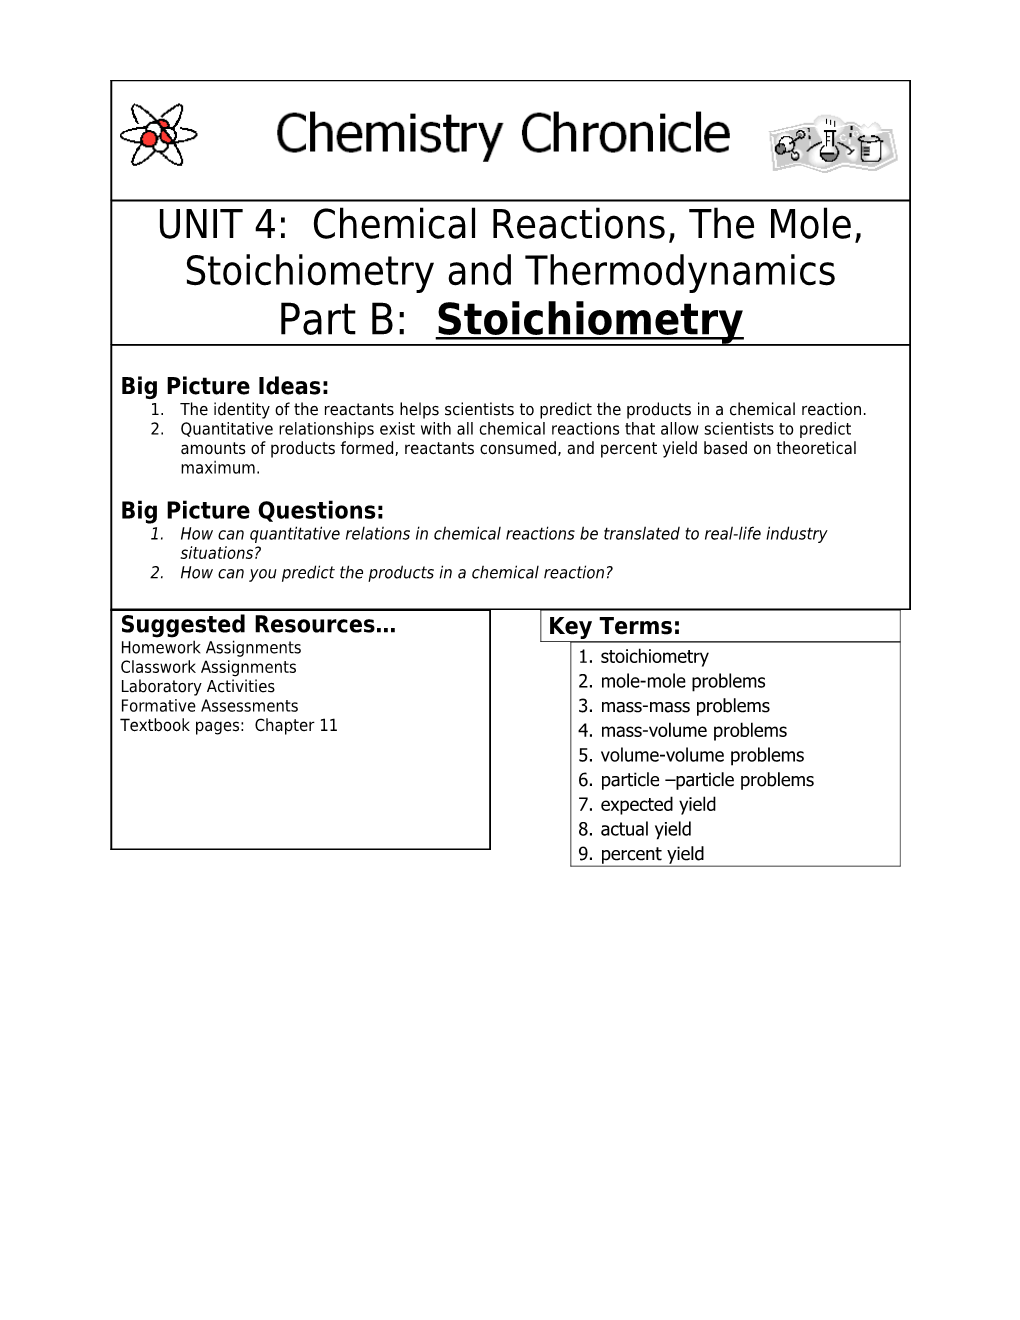 The Identity of the Reactants Helps Scientists to Predict the Products in a Chemical Reaction